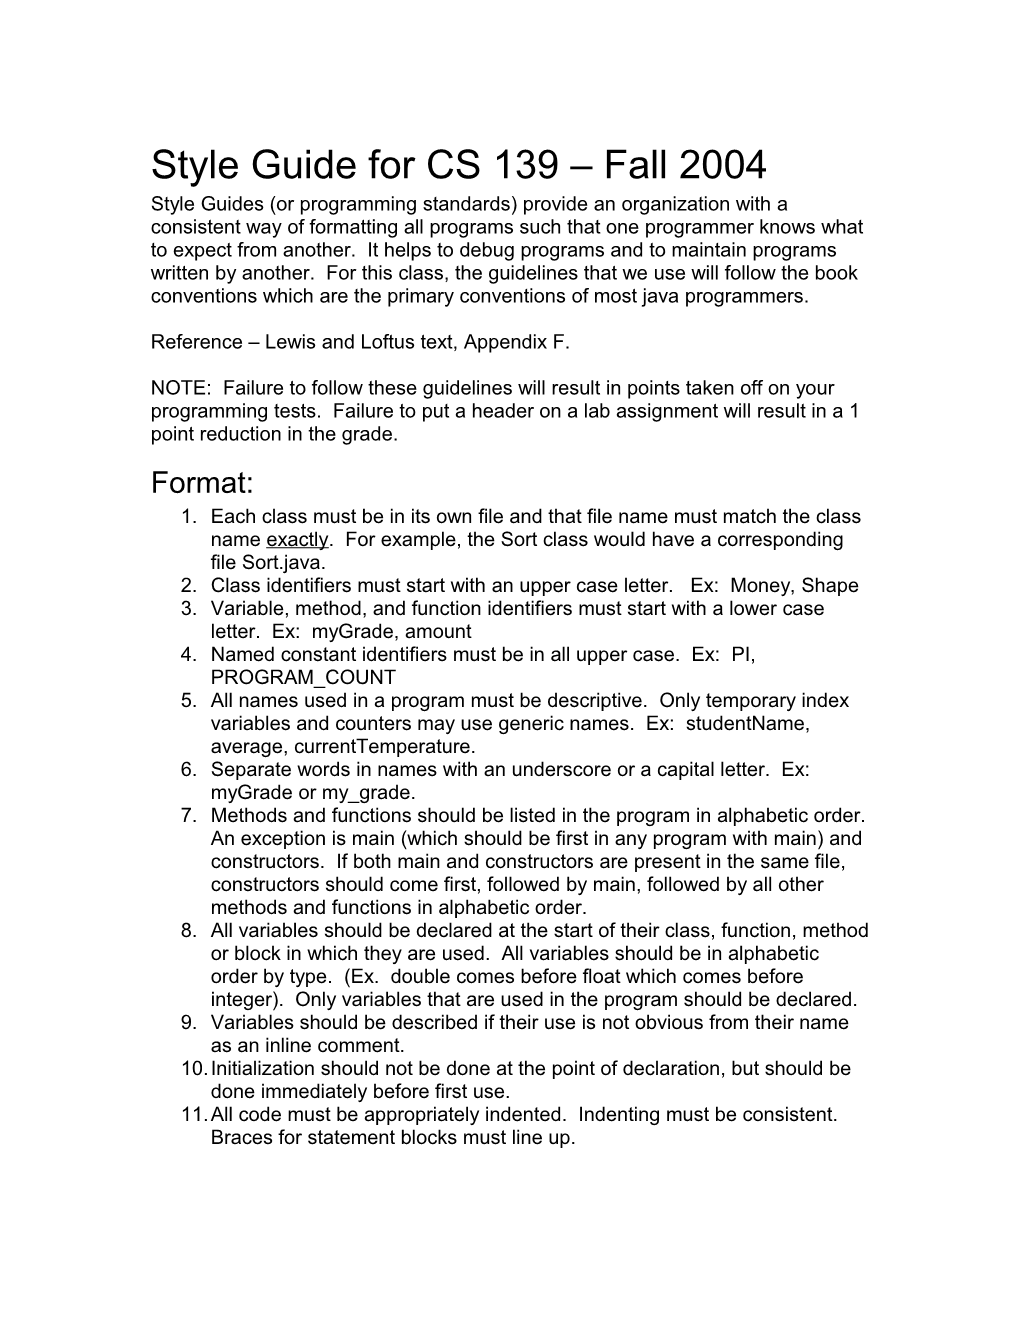 Style Guide for CS 139 Spring 2002